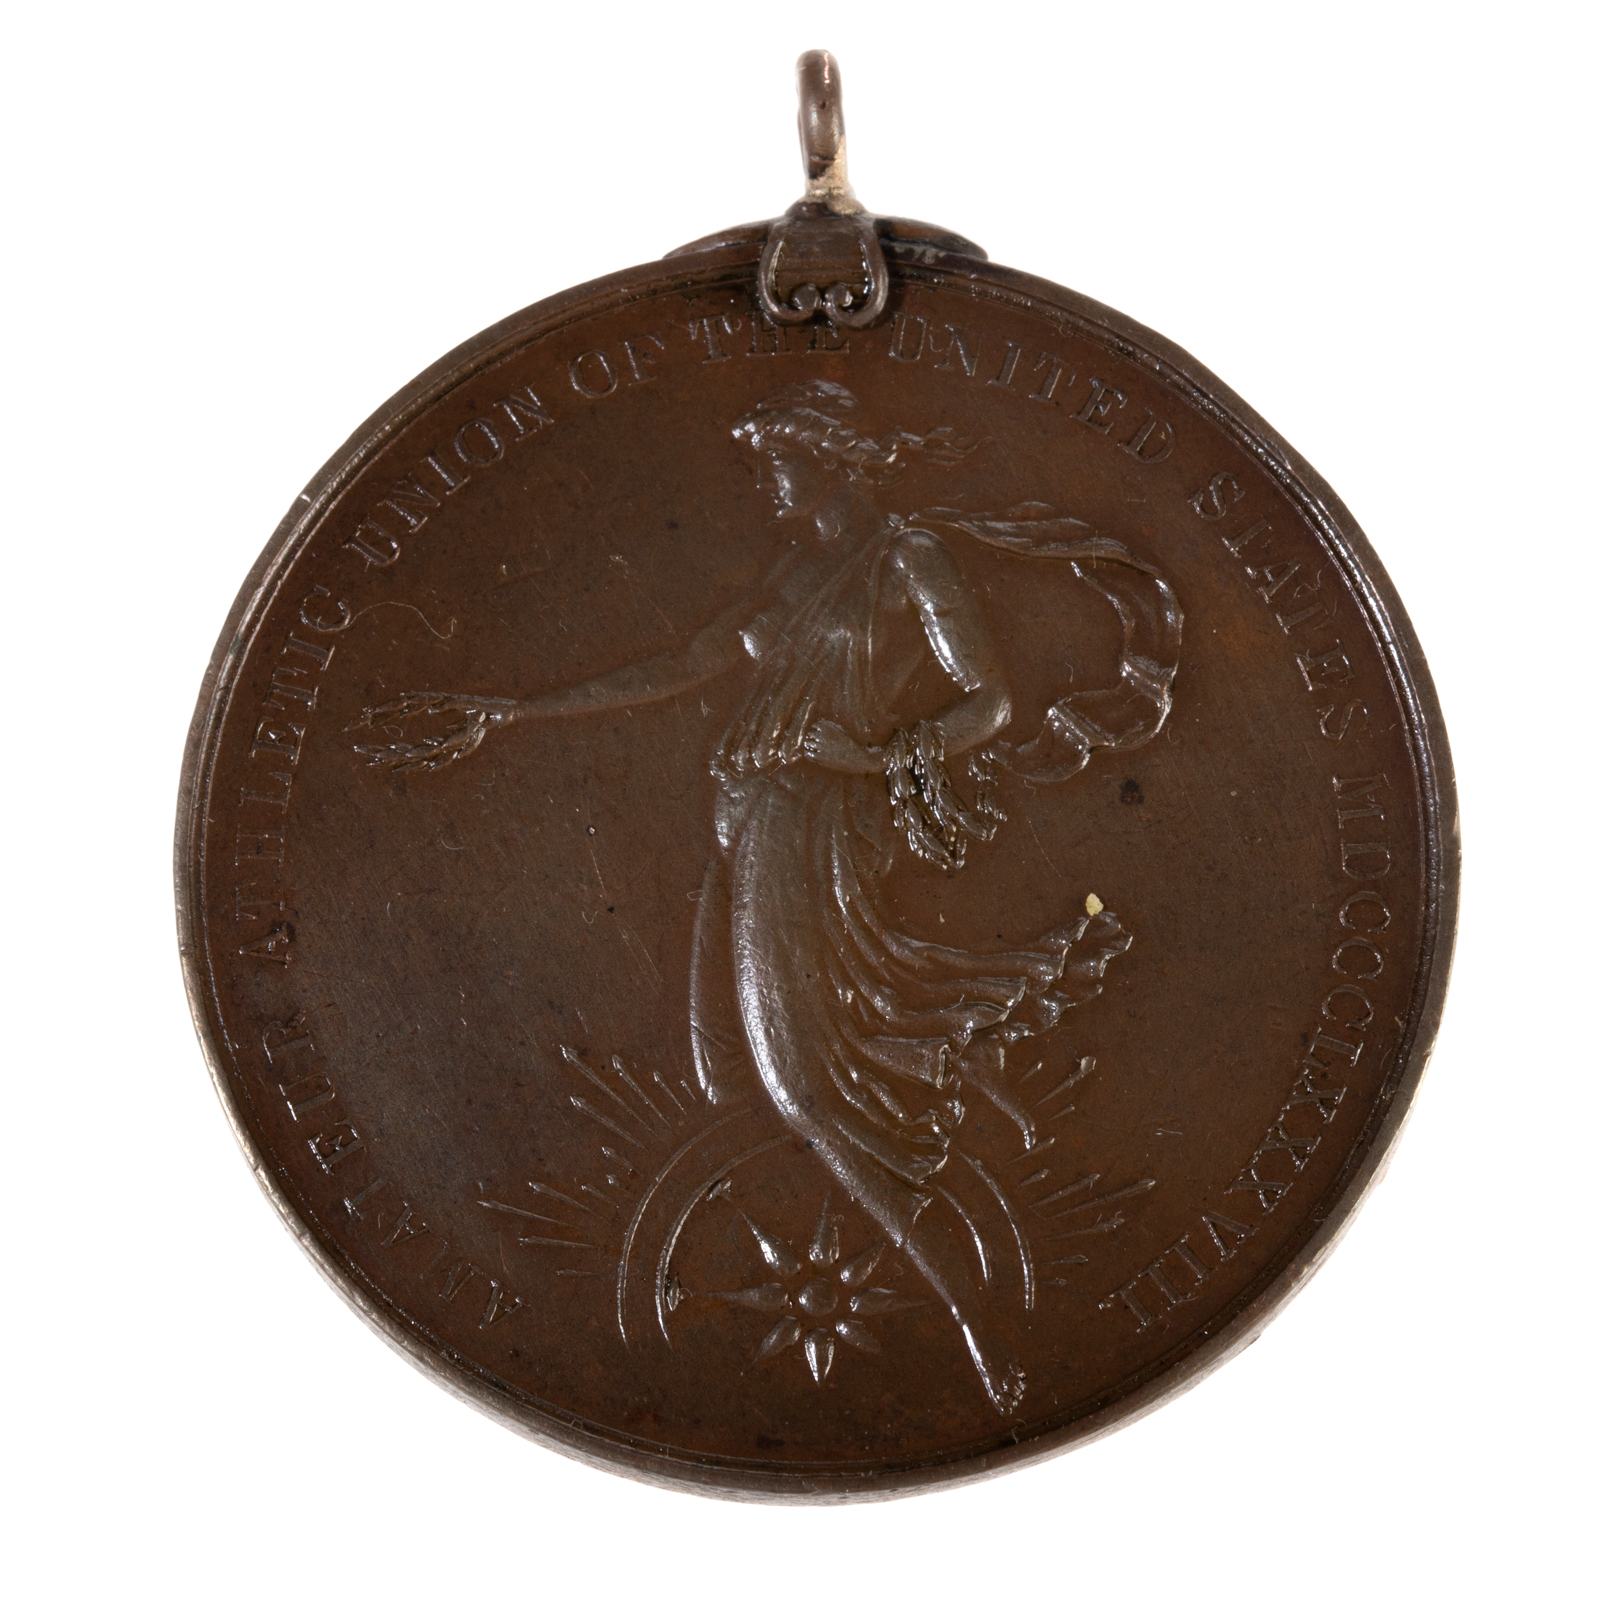 A A U AWARD MEDAL GIVEN IN 1906 29e11d